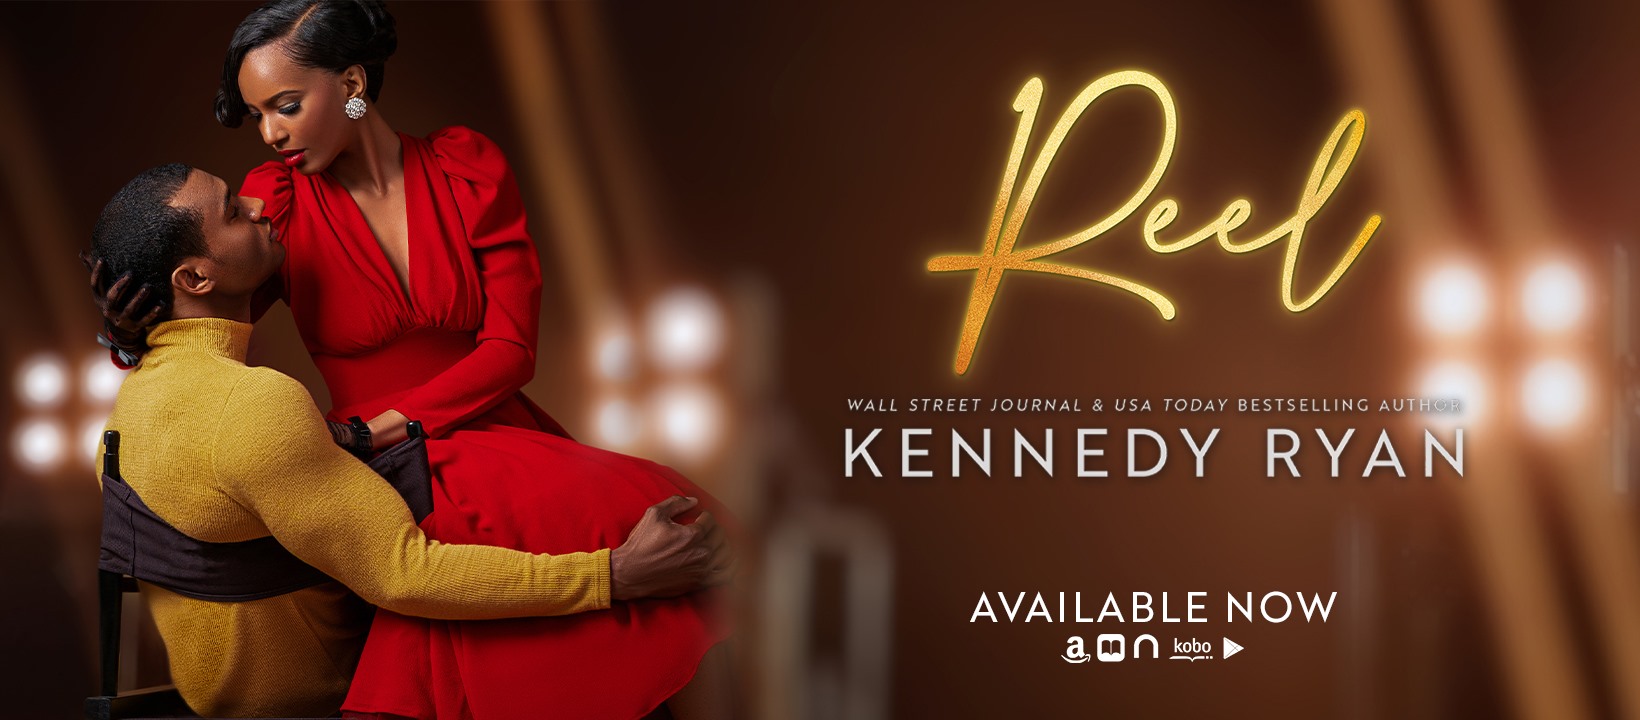 Kennedy Ryan Author - ⭐ REEL Release Giveaway! Signed PB + $50 Gift Card! ⭐  This CONTEMPORARY STANDALONE romance is special, guys. I hope you'll agree.  So what do ya get? ✓